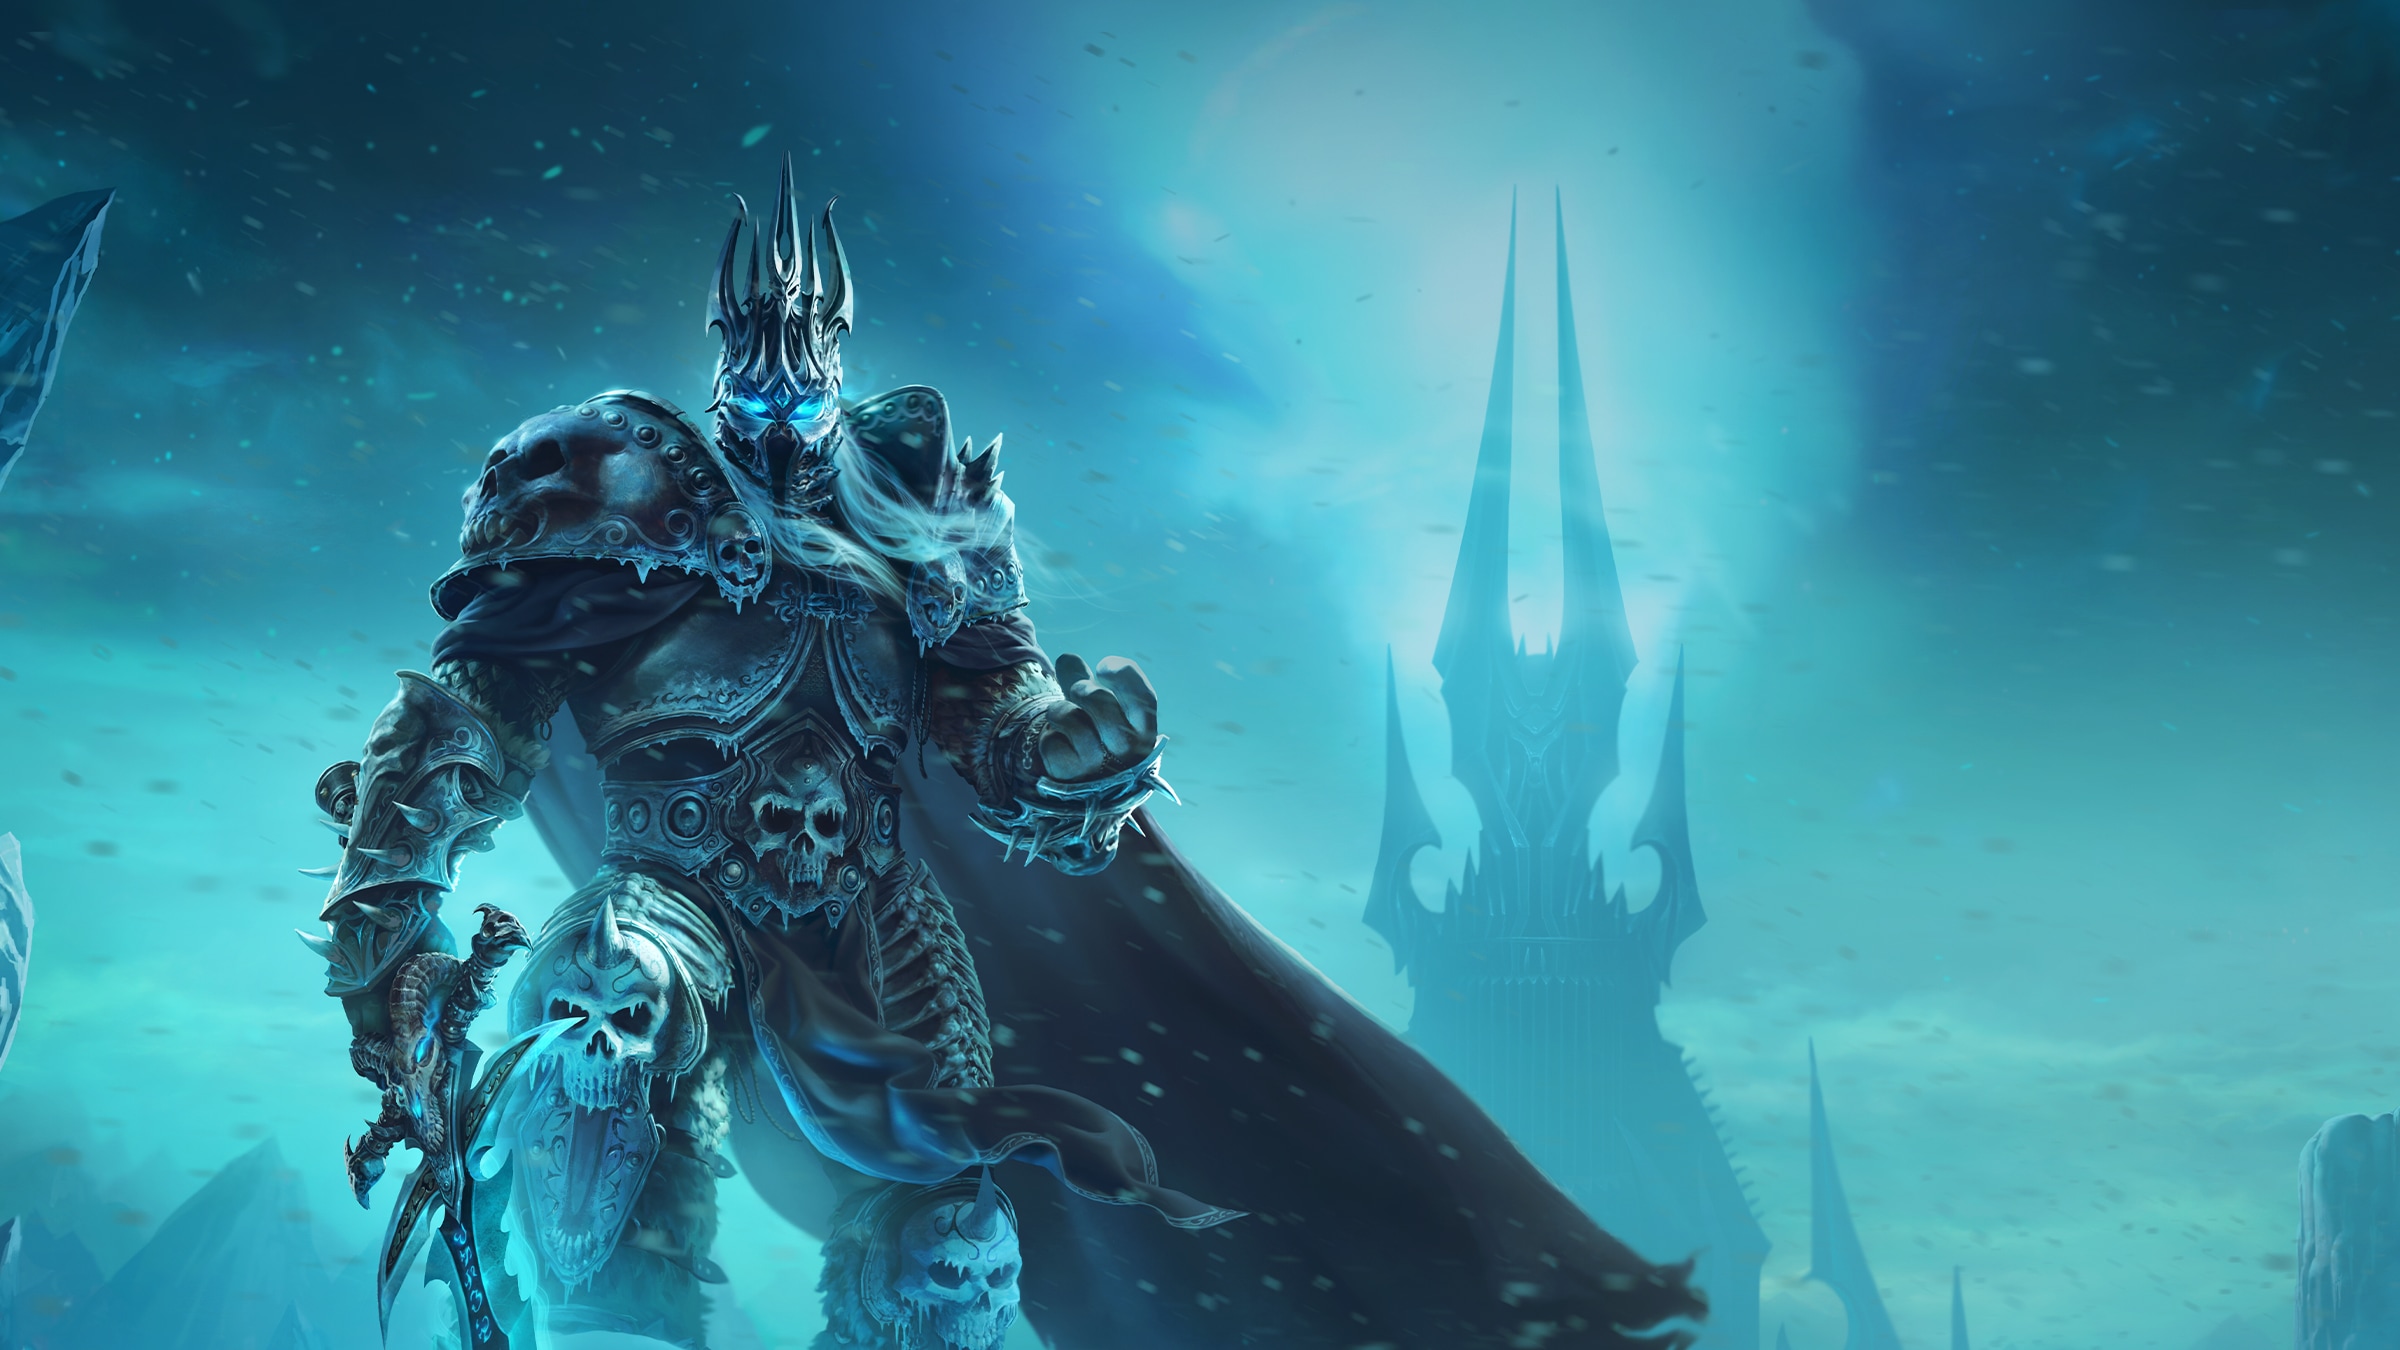 The Wrath of the Lich King Classic Beta Has Begun!